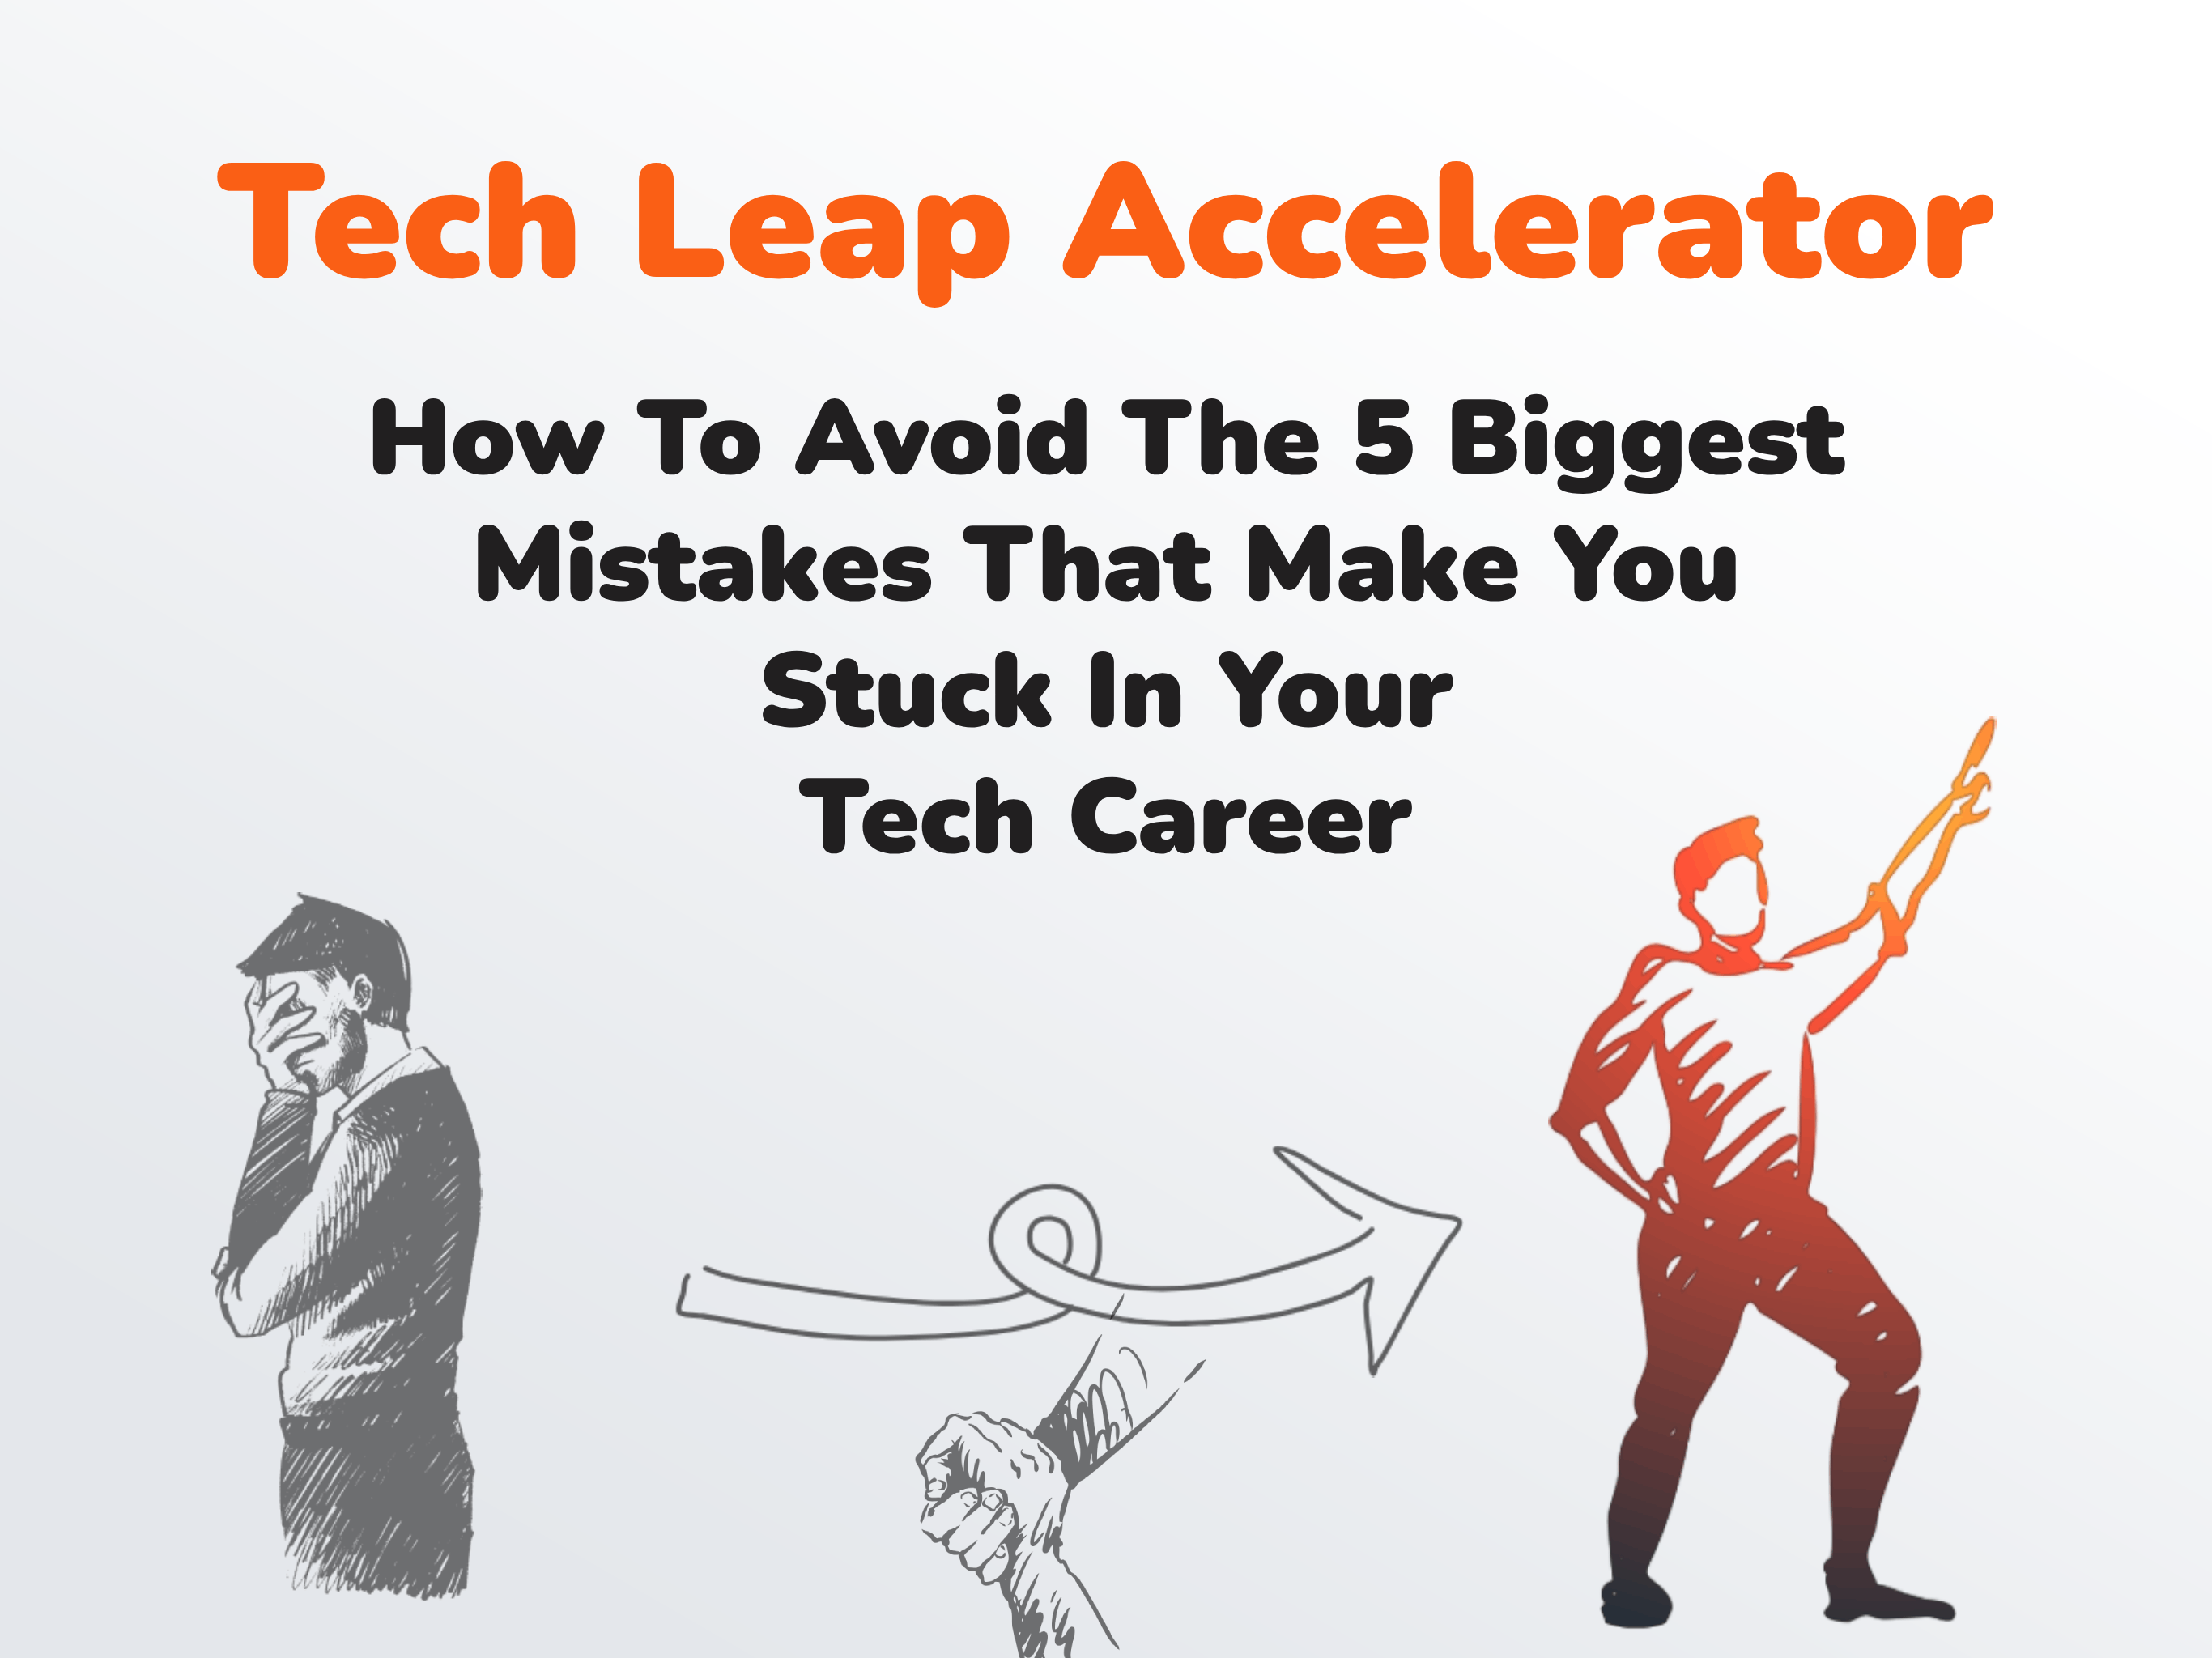 The Tech Leap Accelerator: how to avoid being replaced AI in your tech job